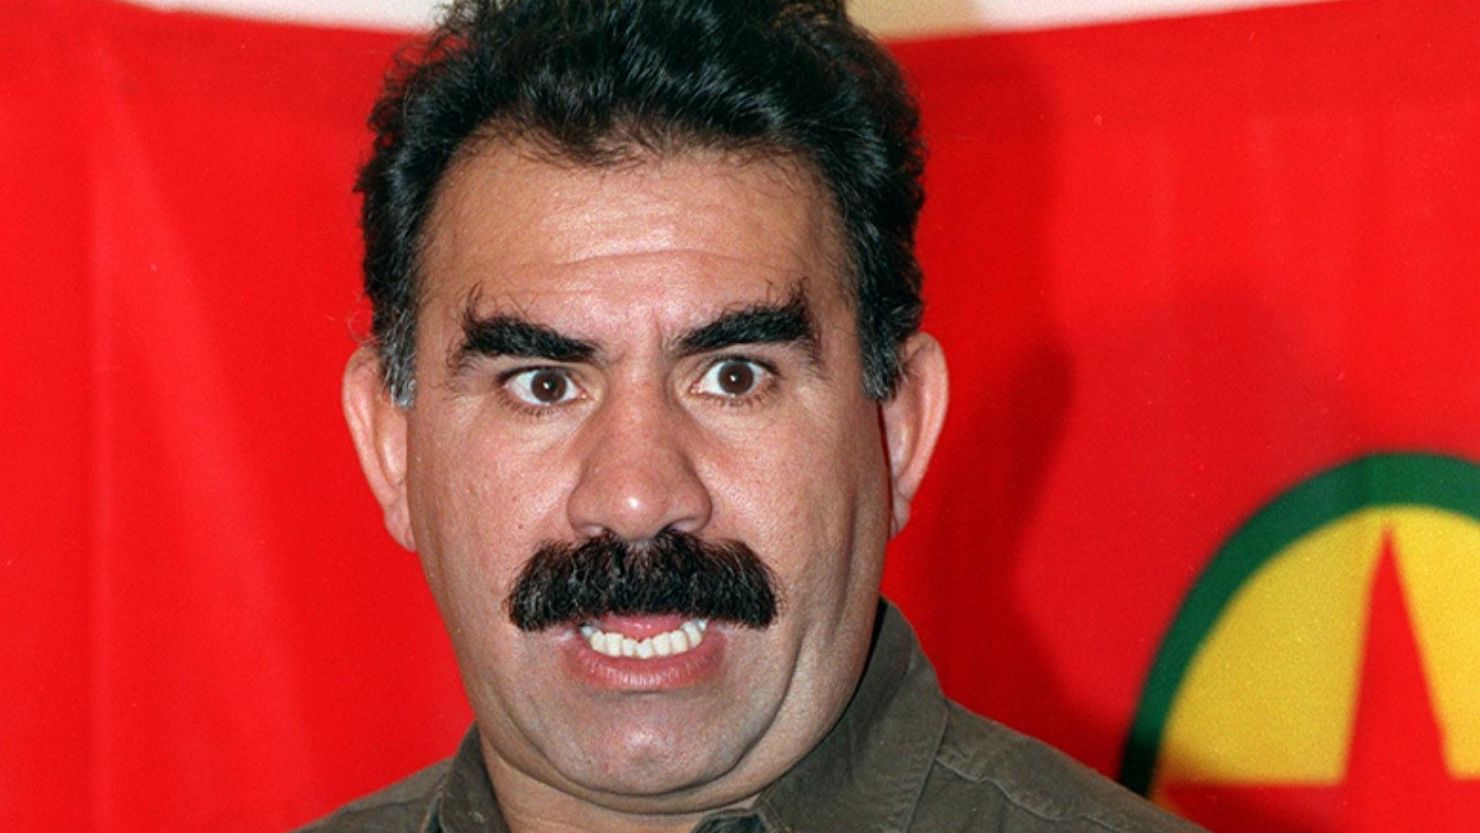 PKK founder Abdullah Ocalan, pictured in 1993, reportedly hasn't seen any family in two years.